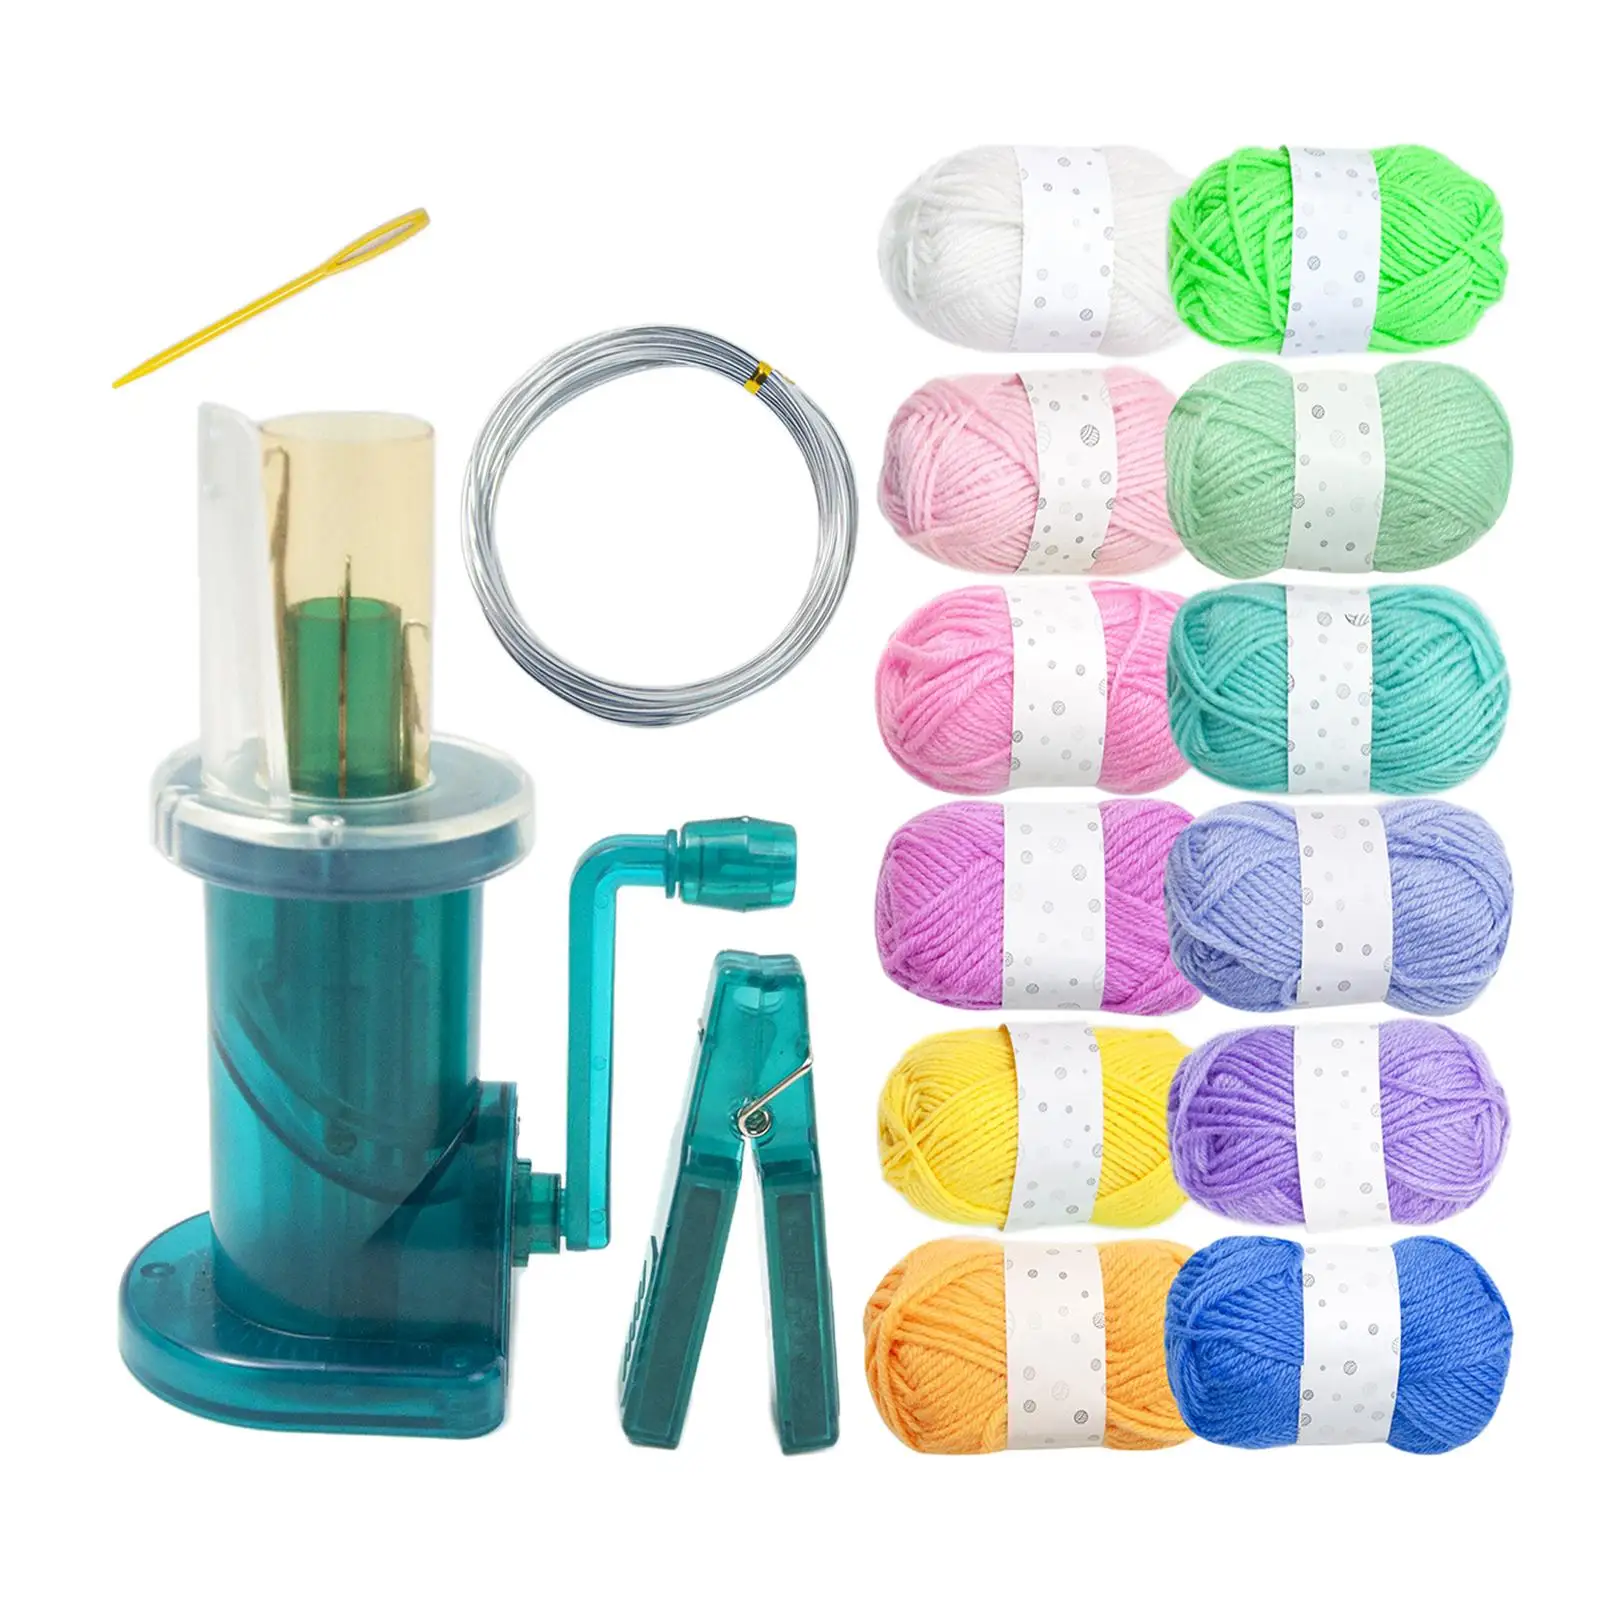 Easy Knitter Sewing Accessories Manual Spool Knitter Knitting Tool for DIY Craft Adult Bracelet Home Sweaters